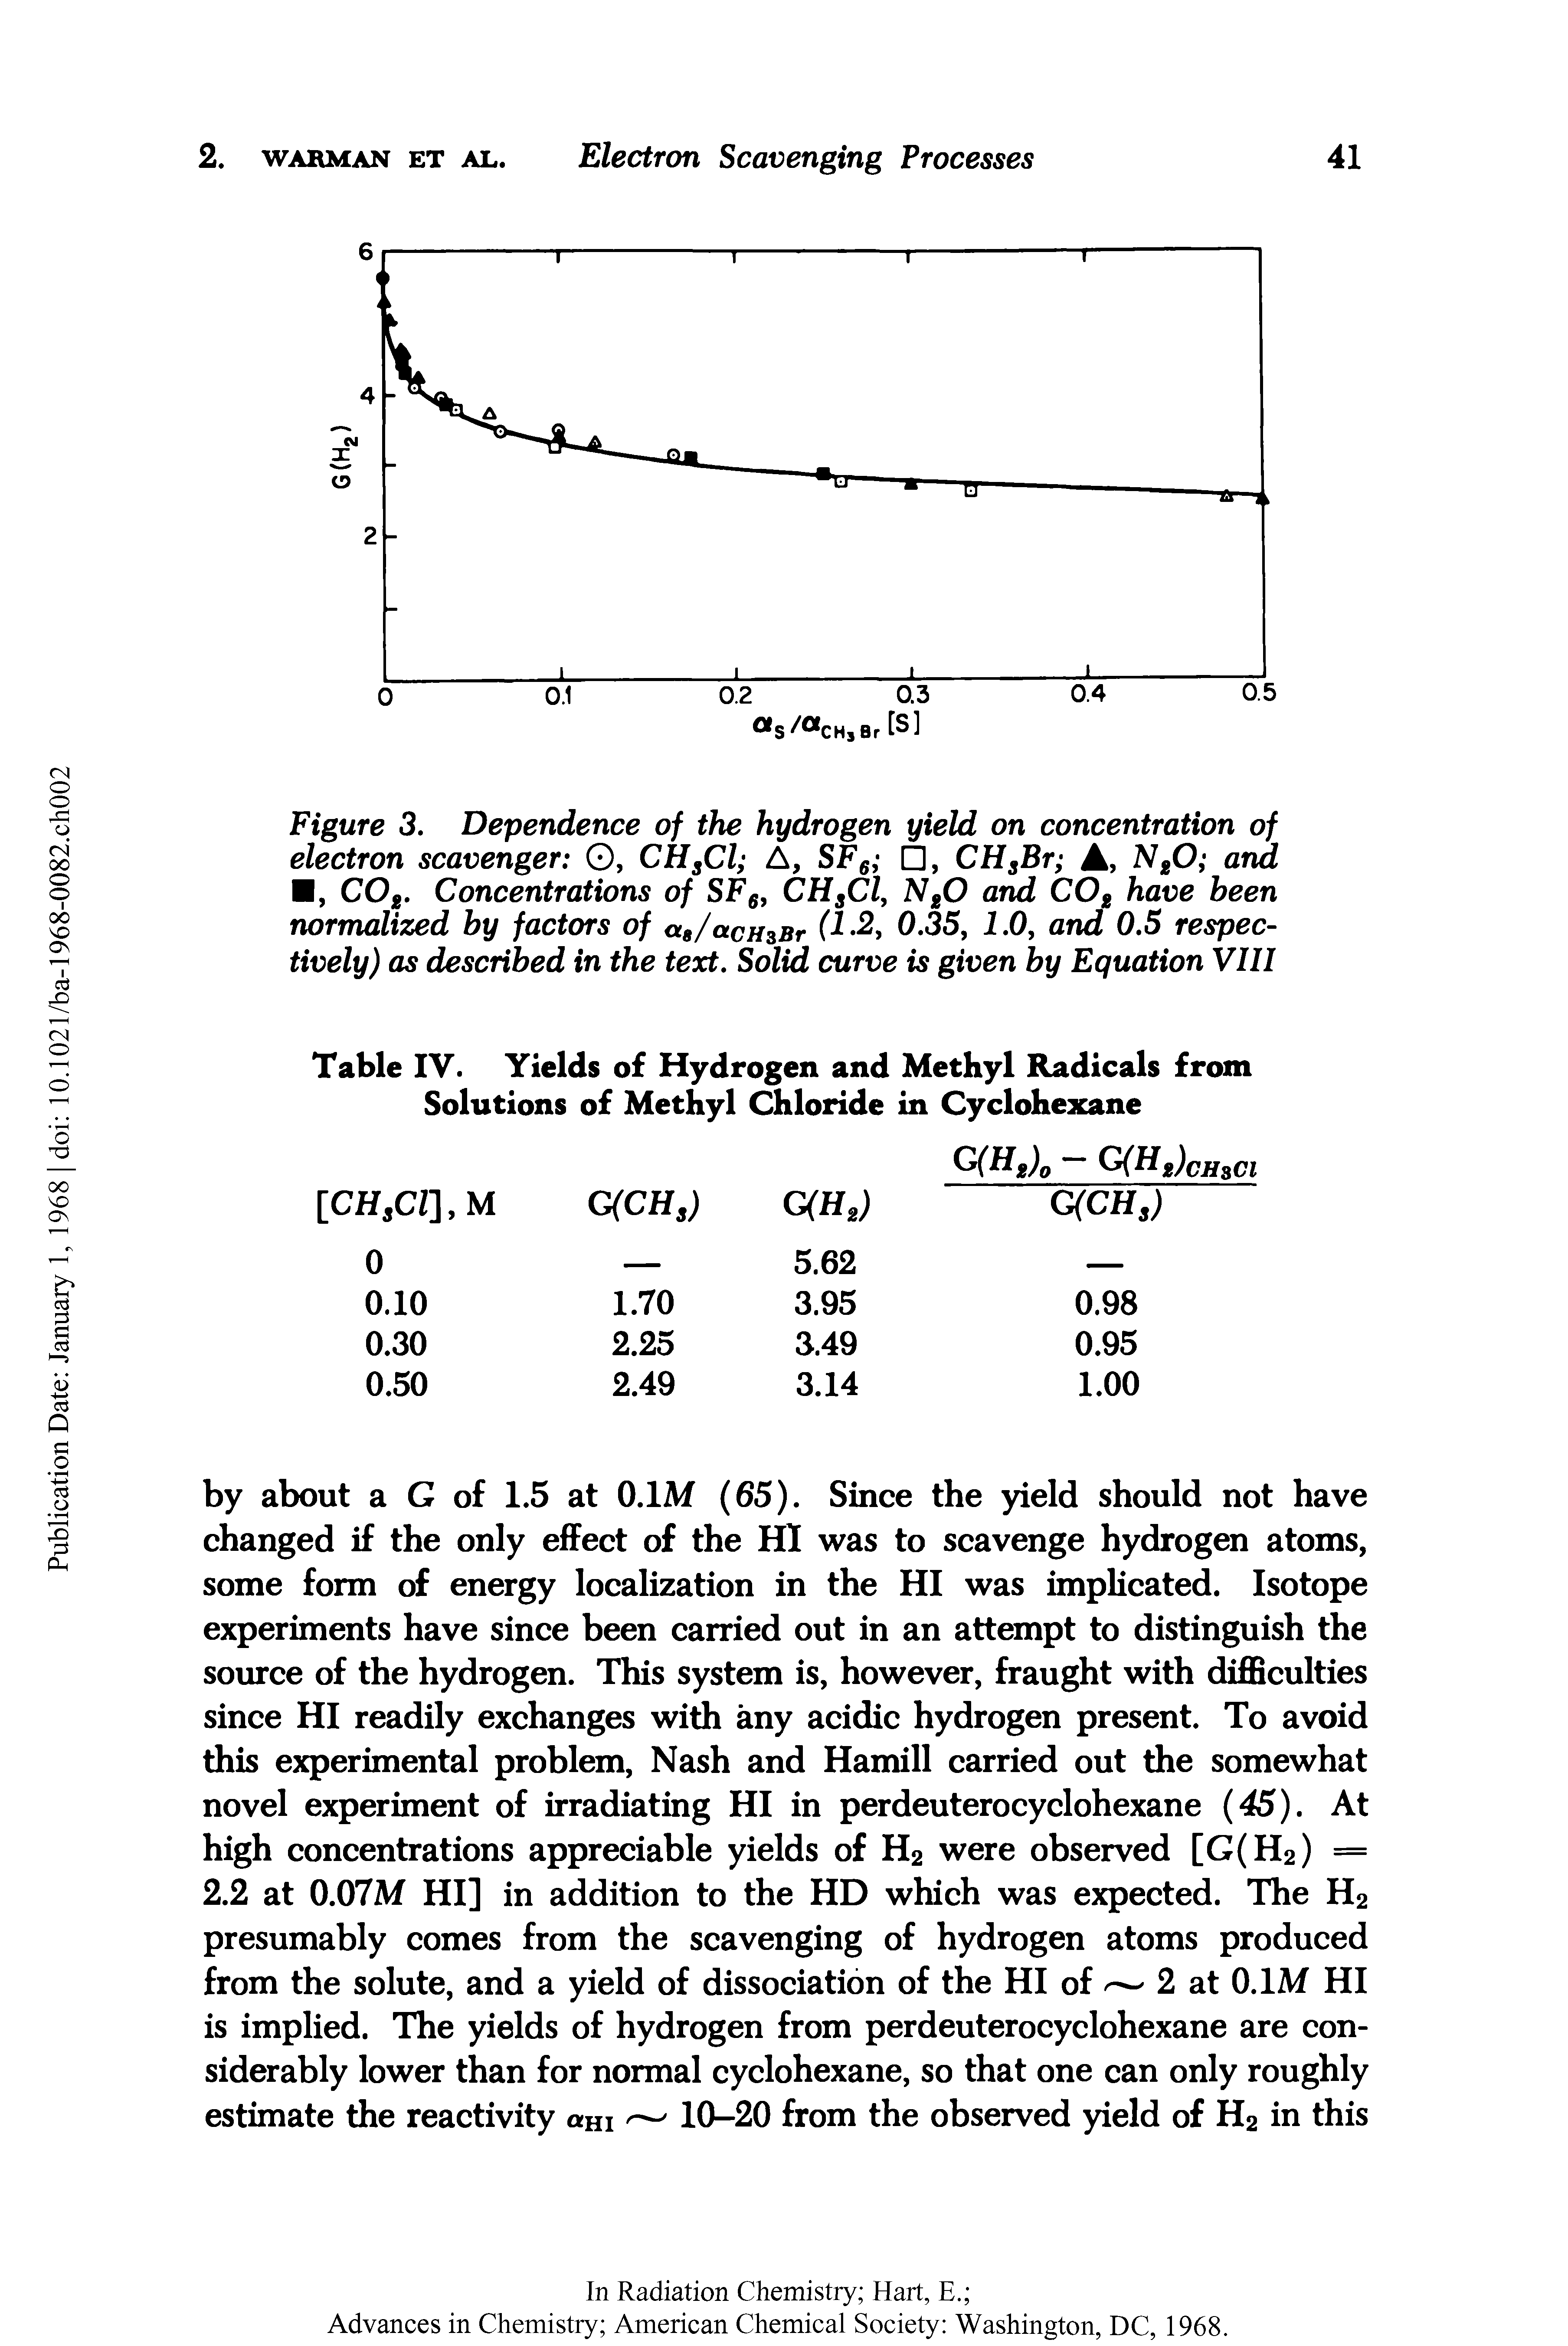 Figure 3. Dependence of the hydrogen yield on concentration of electron scavenger O, CH3Cl A, SF6 , CHsBr A, NgO and , COg. Concentrations of SF6i CHsCl, NgO and C02 have been normalized by factors of a8/acHSBr 0.35, 1.0, and 0.5 respectively) as described in the text. Solid curve is given by Equation VIII...